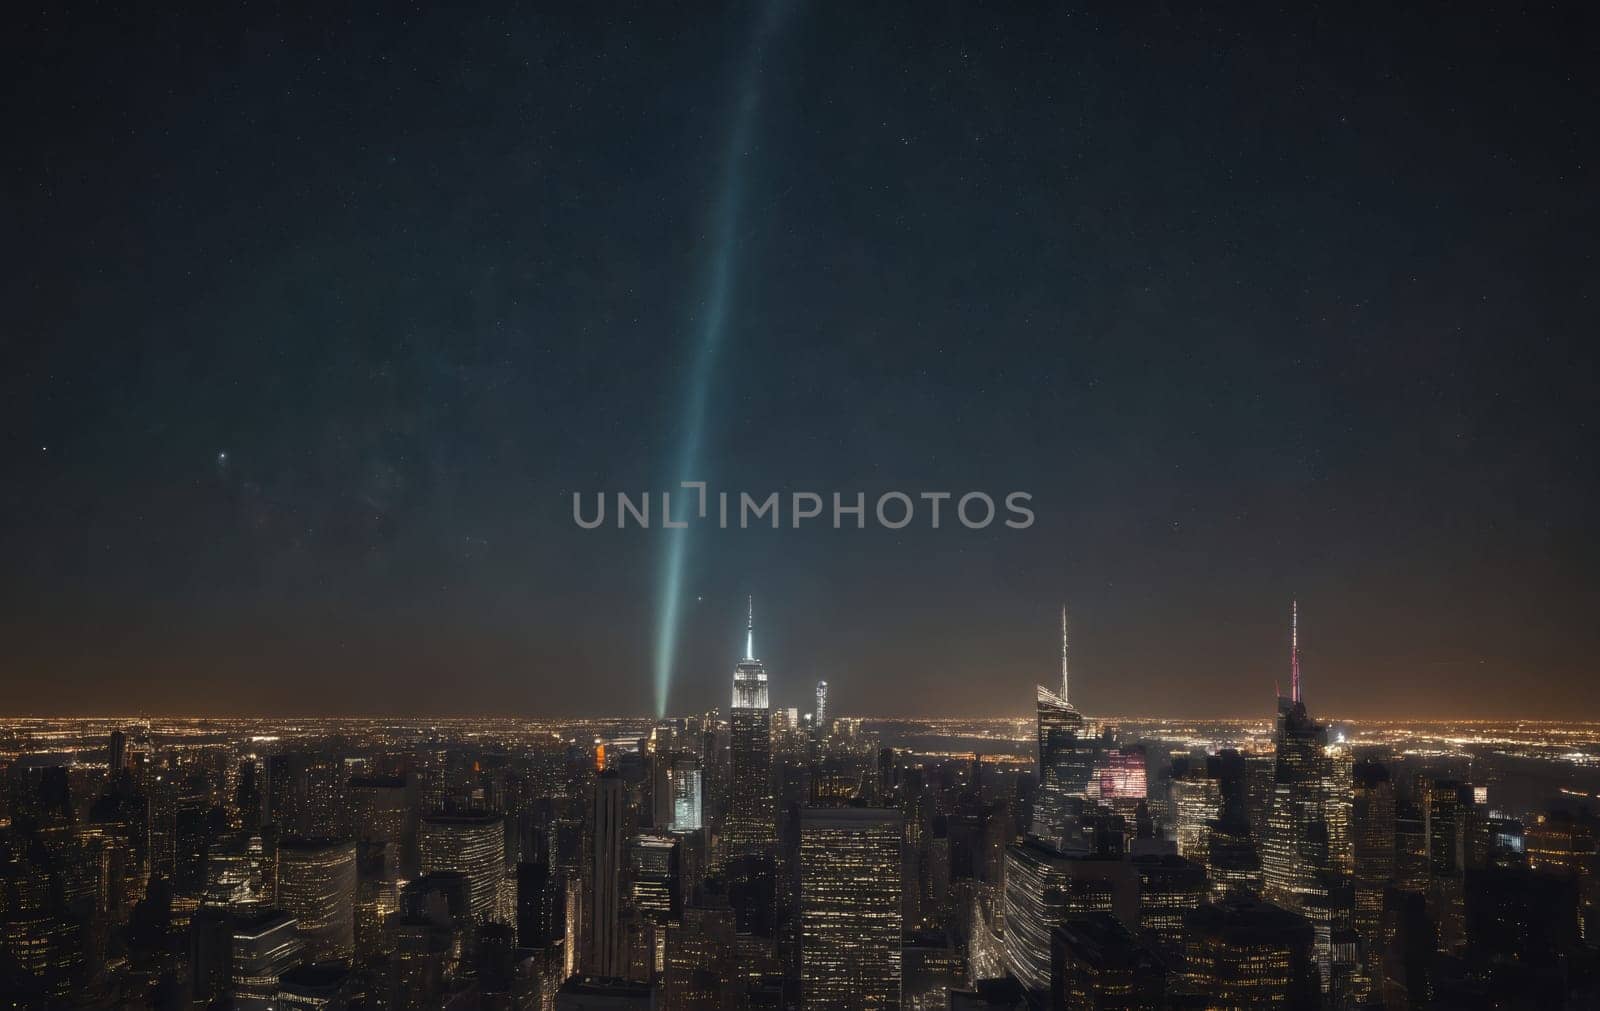 City skyline with skyscrapers under a starry sky and the Milky Way visible by Andre1ns